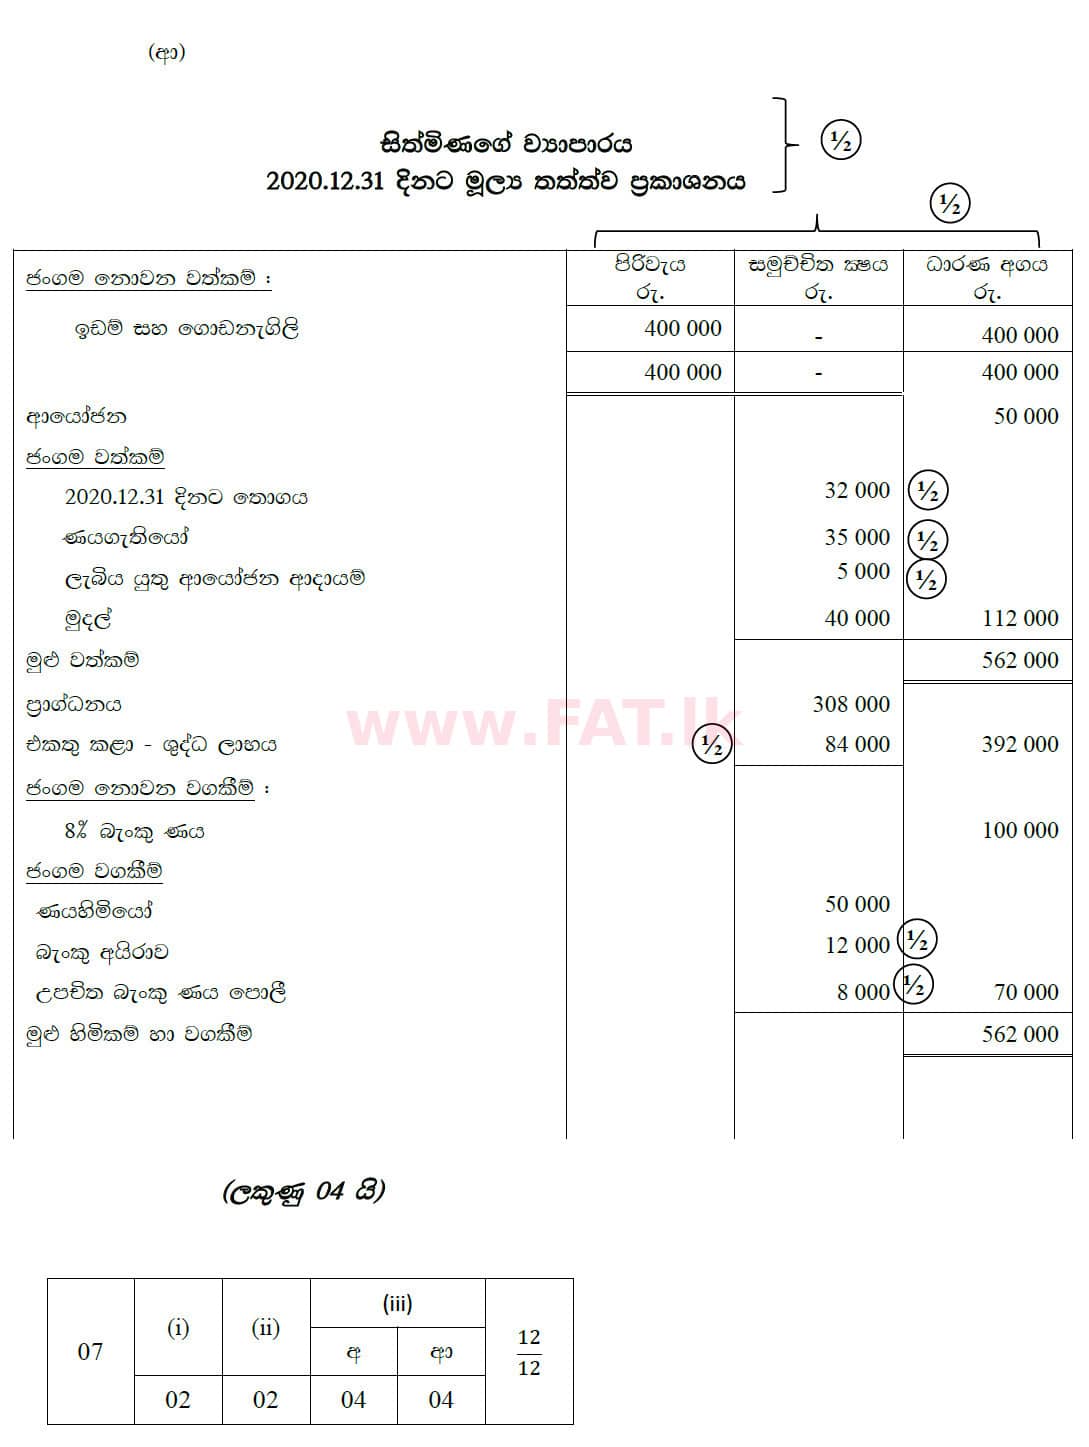 National Syllabus : Ordinary Level (O/L) Business and Accounting Studies - 2020 March - Paper II (සිංහල Medium) 7 5775